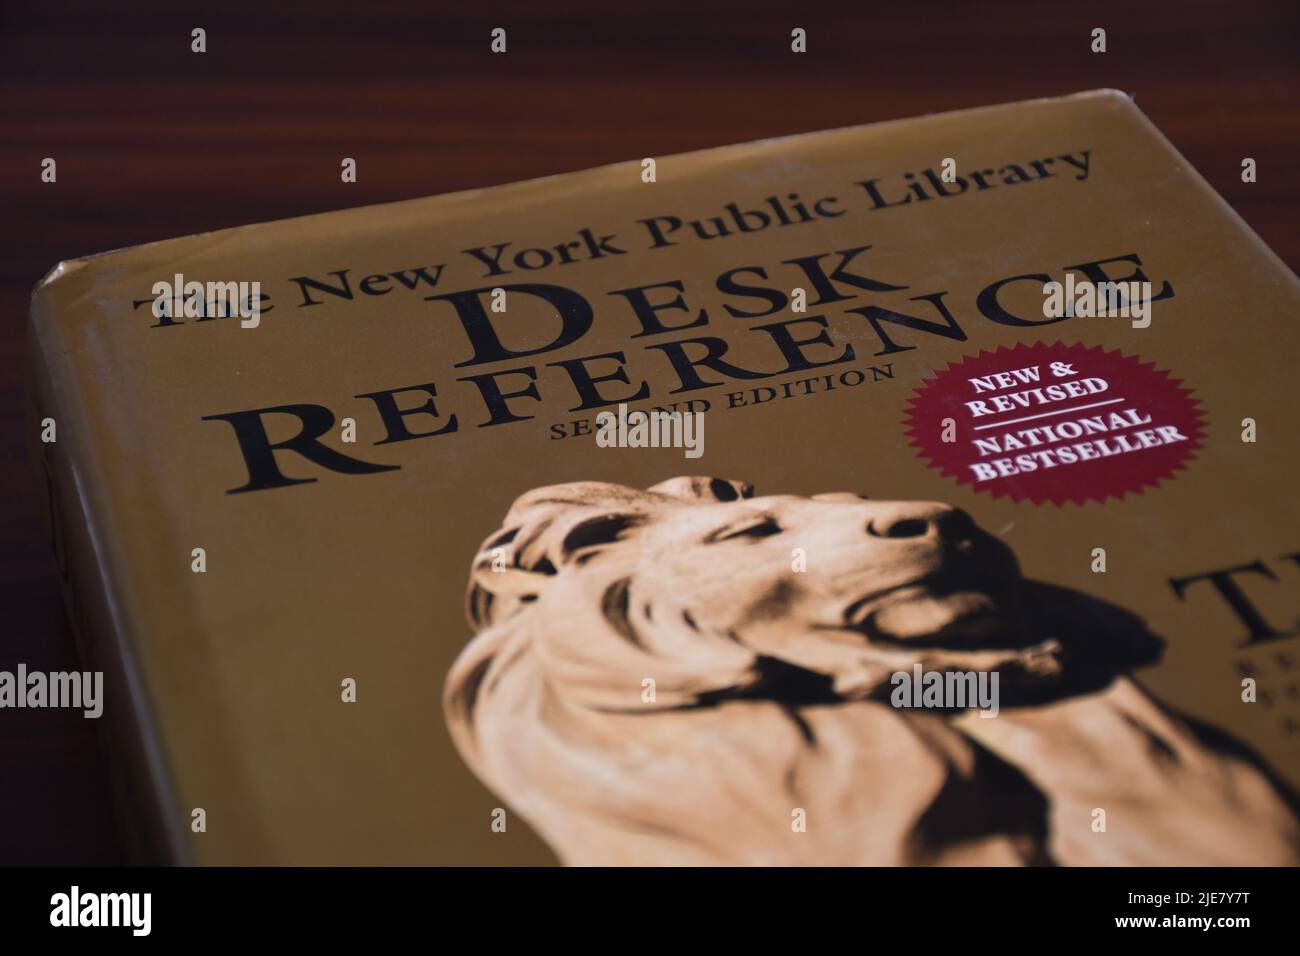 Desk Reference book by New York Library on a table Stock Photo